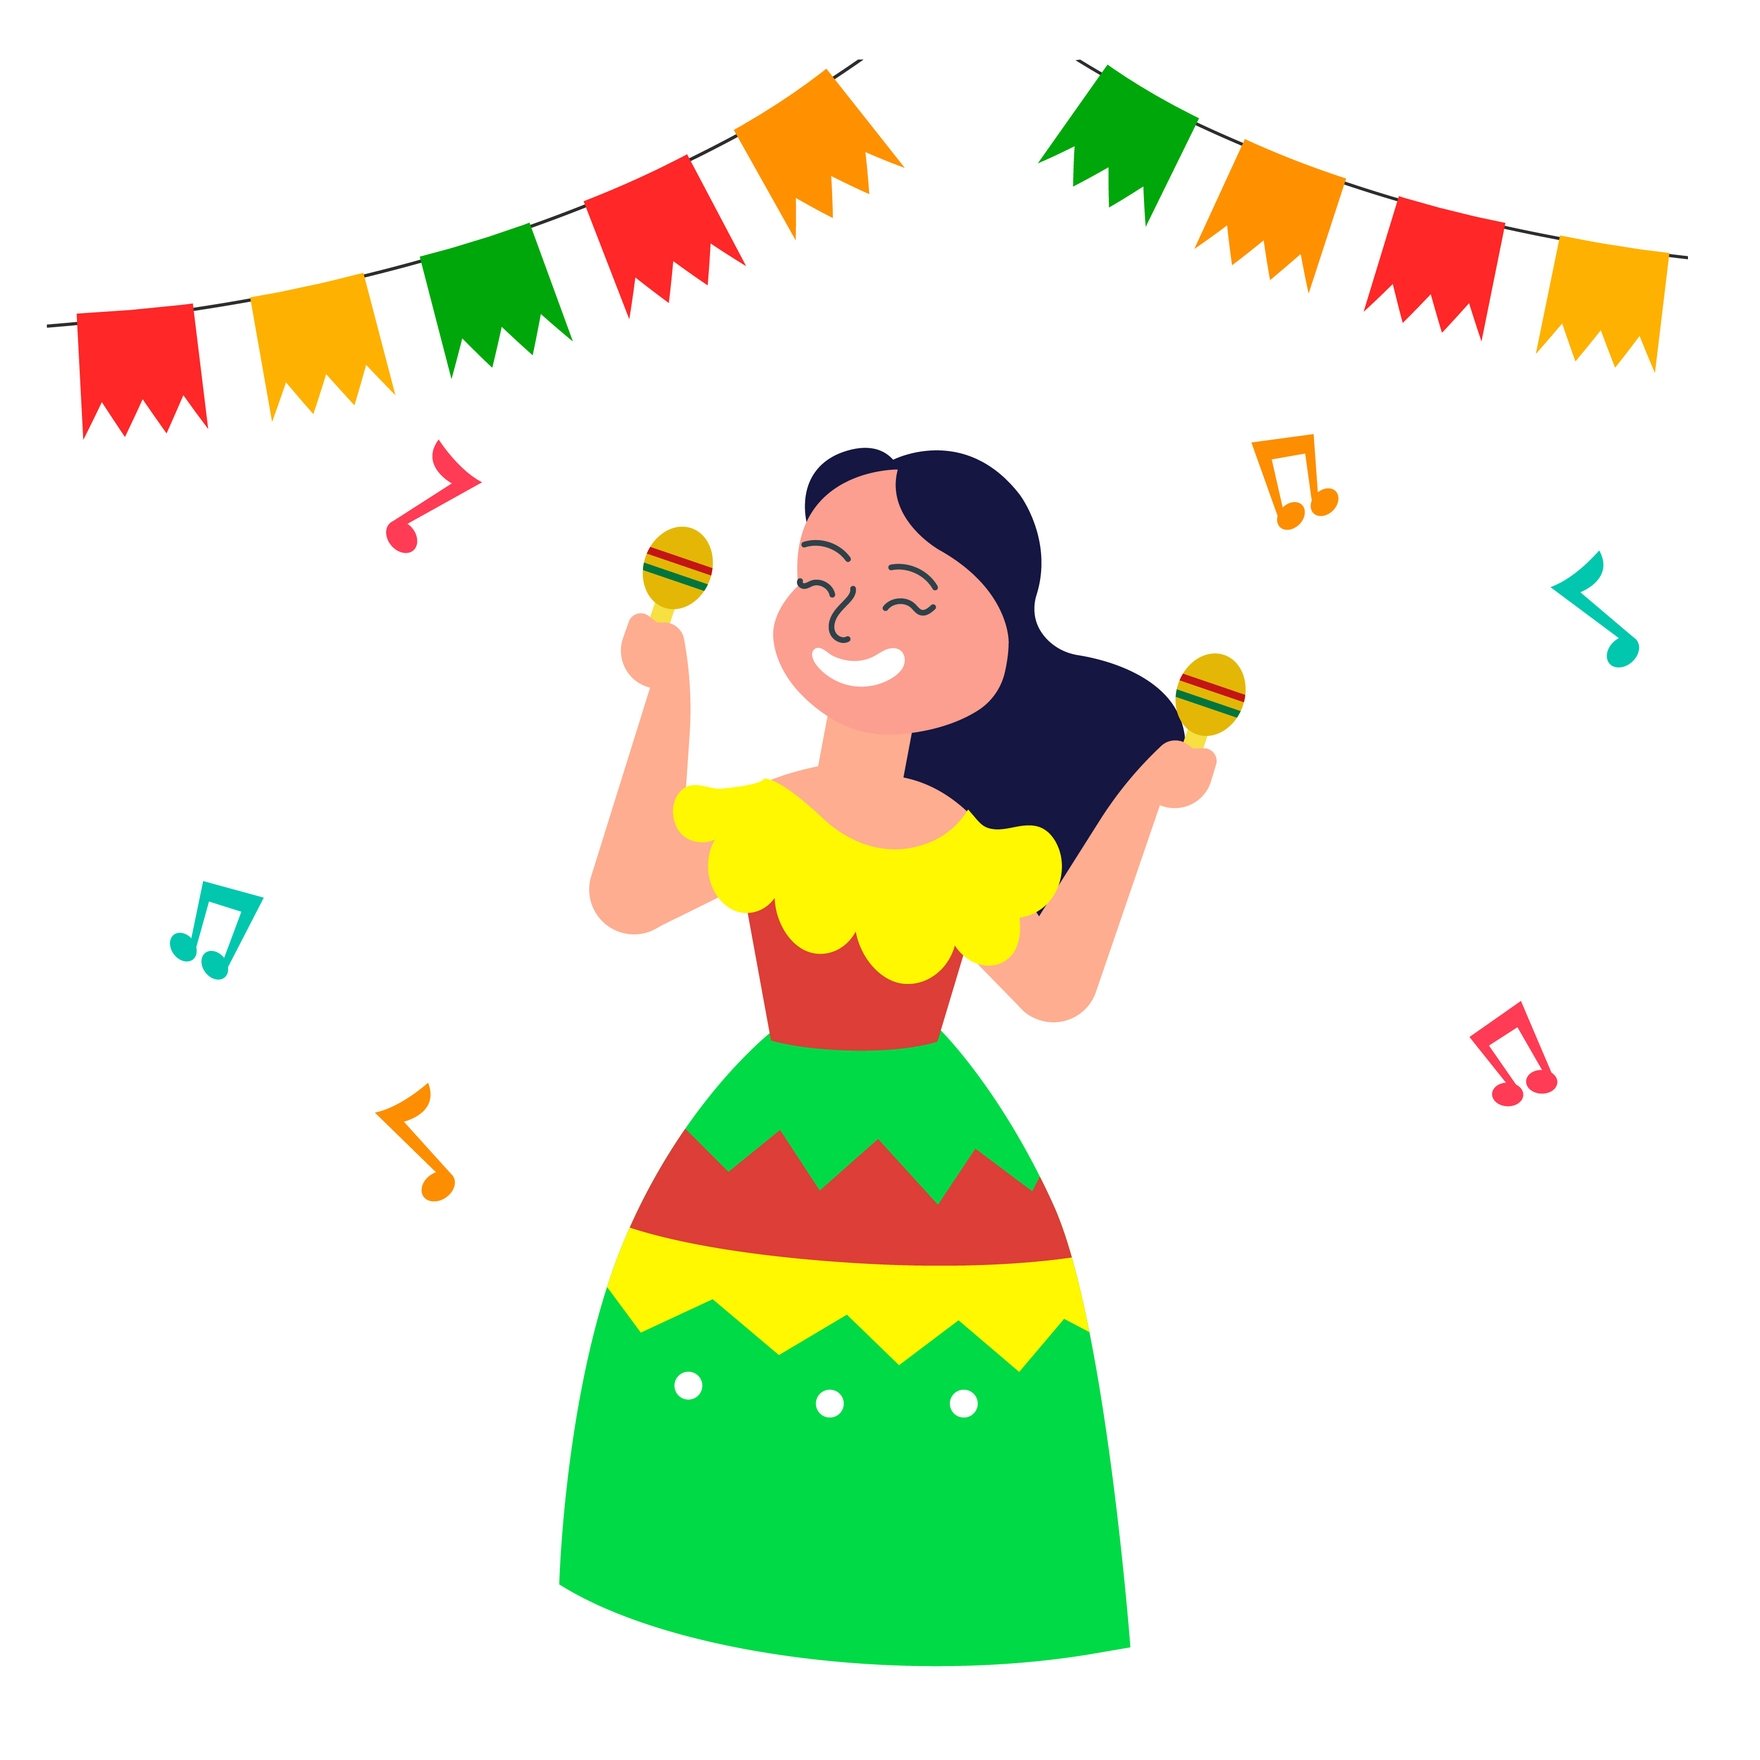 Free Cinco De Mayo Party Gif in Illustrator, EPS, SVG, JPG, GIF, PNG, After Effects